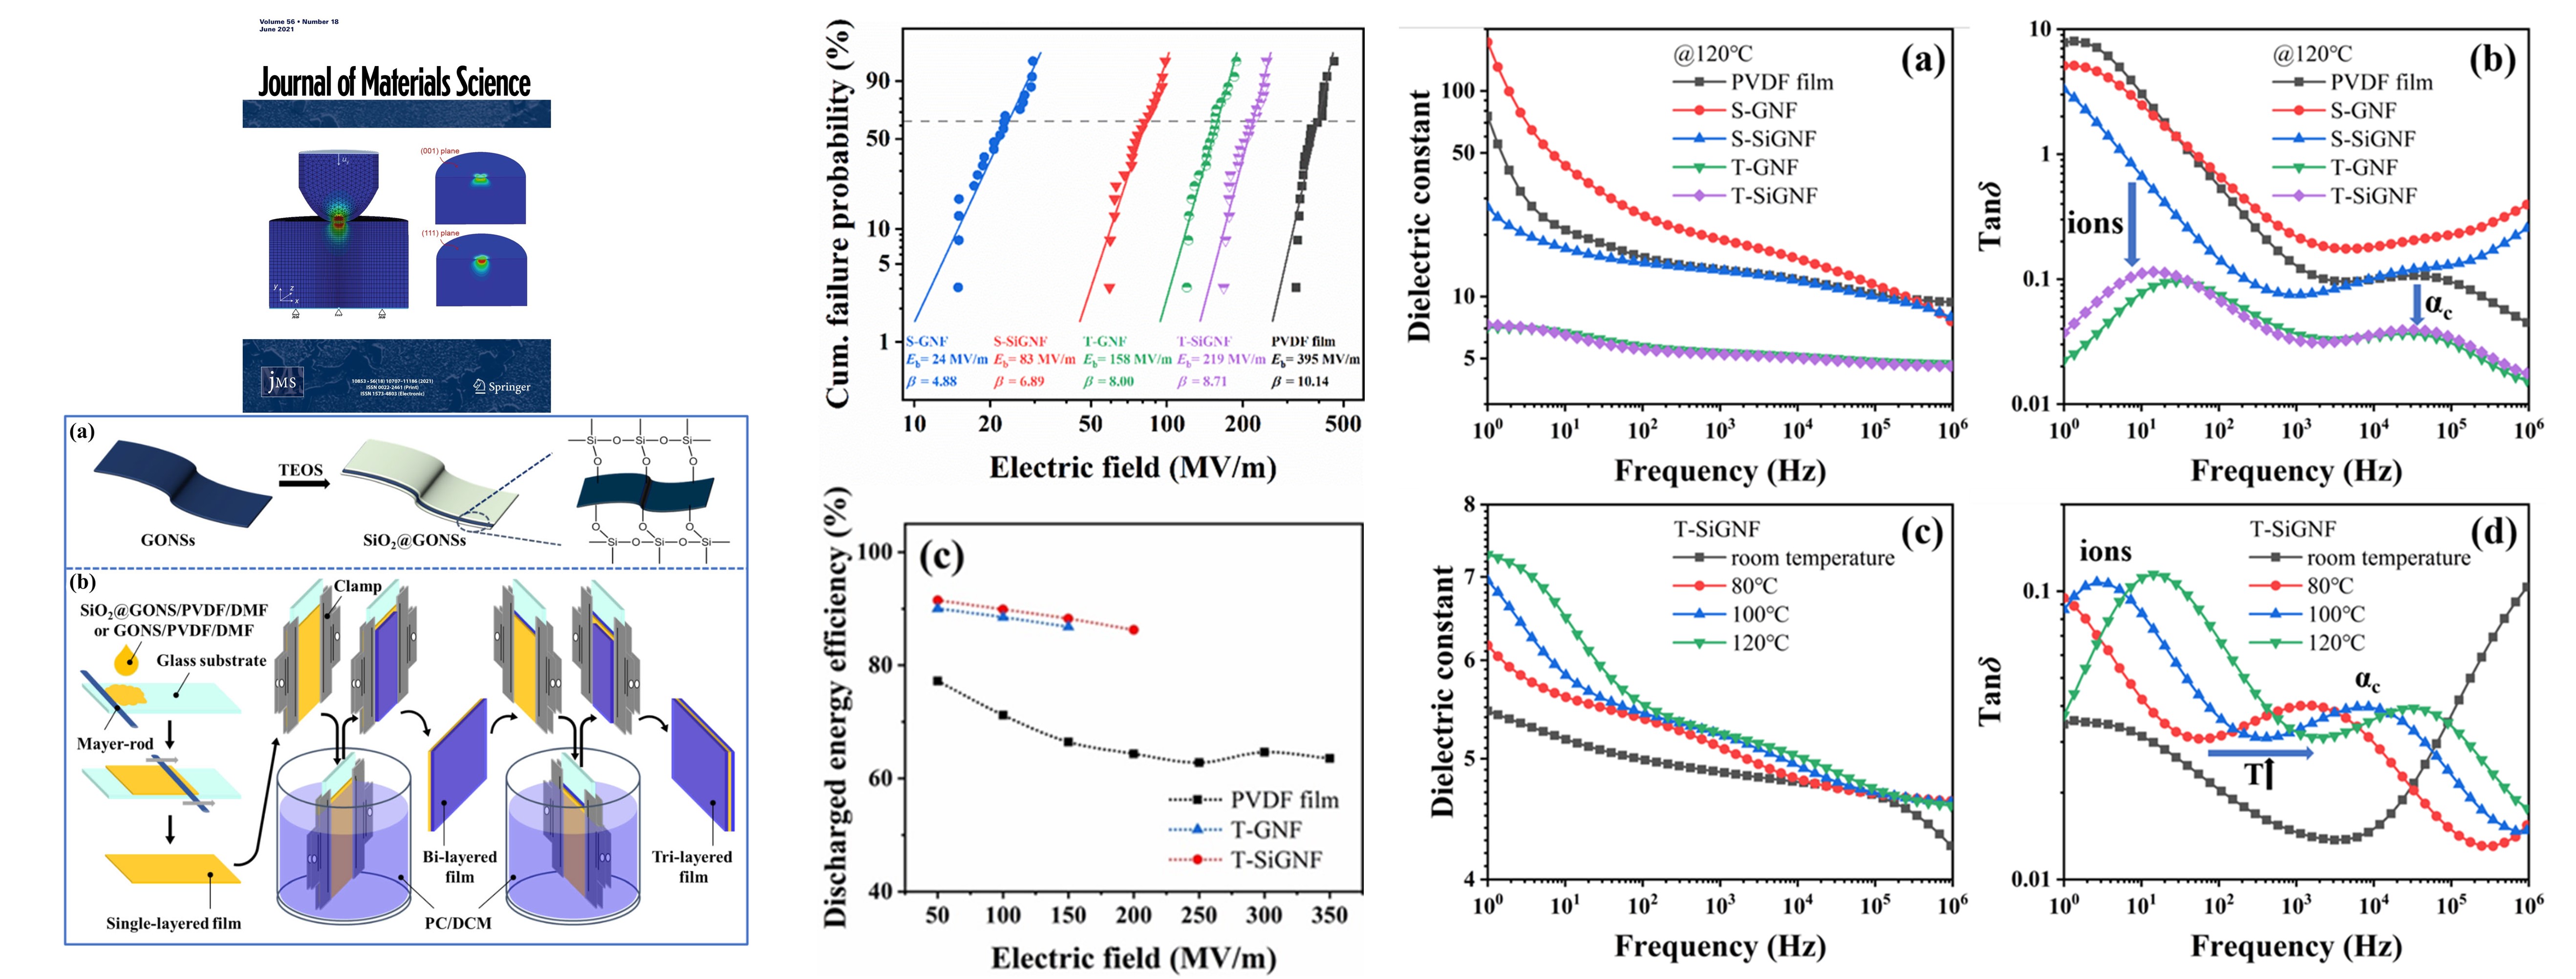 Simultaneous enhancement of breakdown strength and discharged energy efficiency of tri-layered polymer nanocomposite films by incorporating modified graphene oxide nanosheets